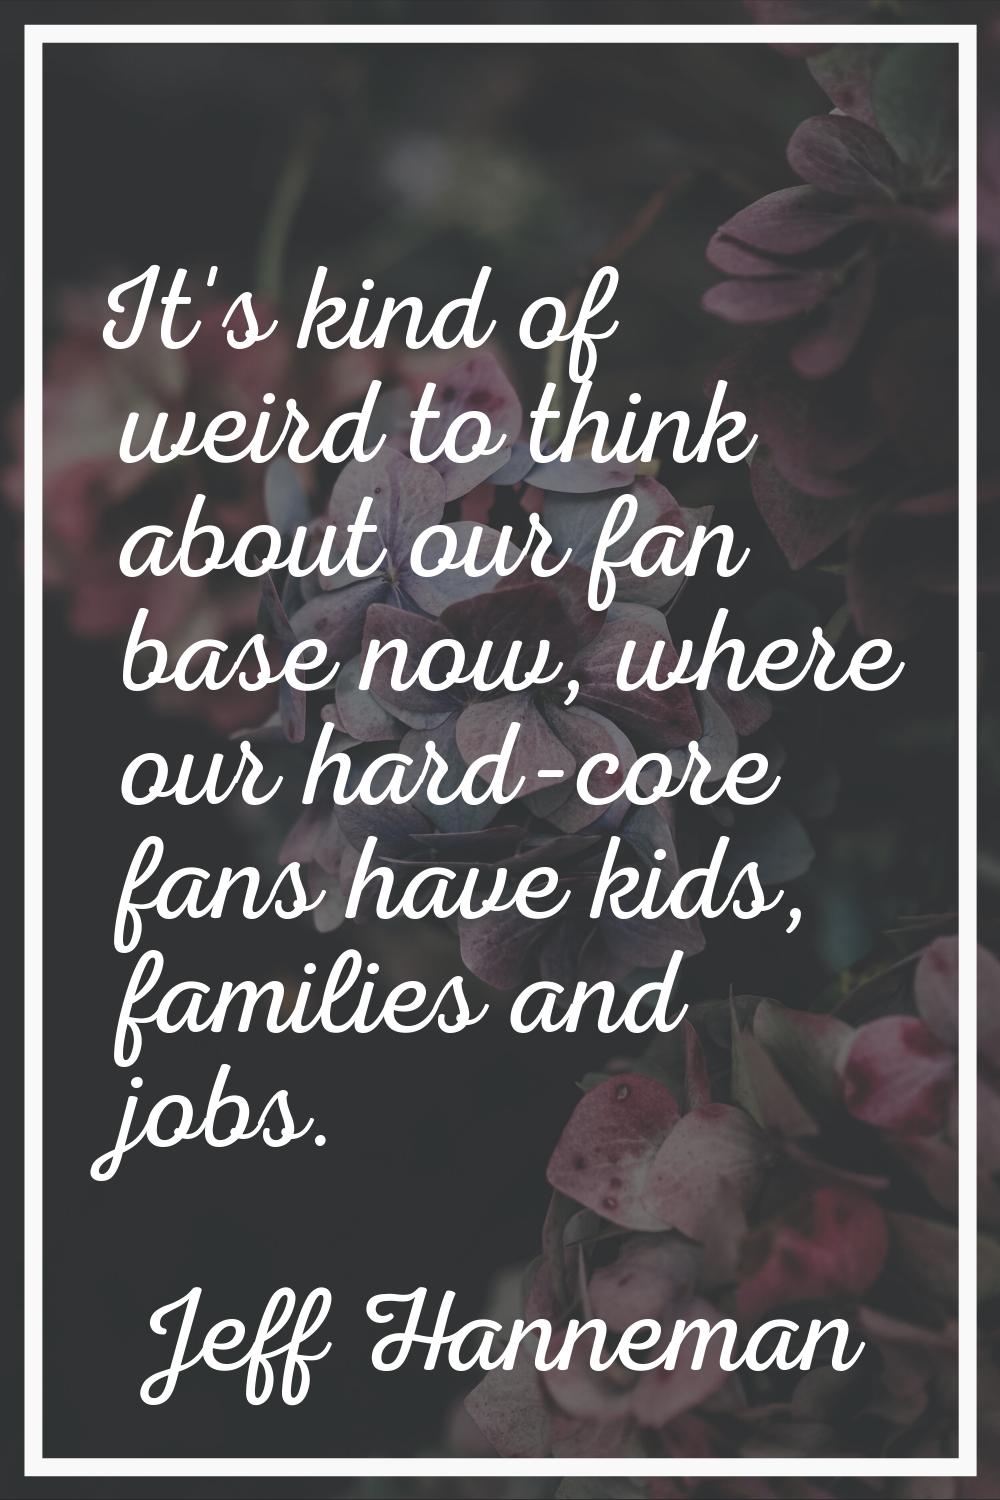 It's kind of weird to think about our fan base now, where our hard-core fans have kids, families an